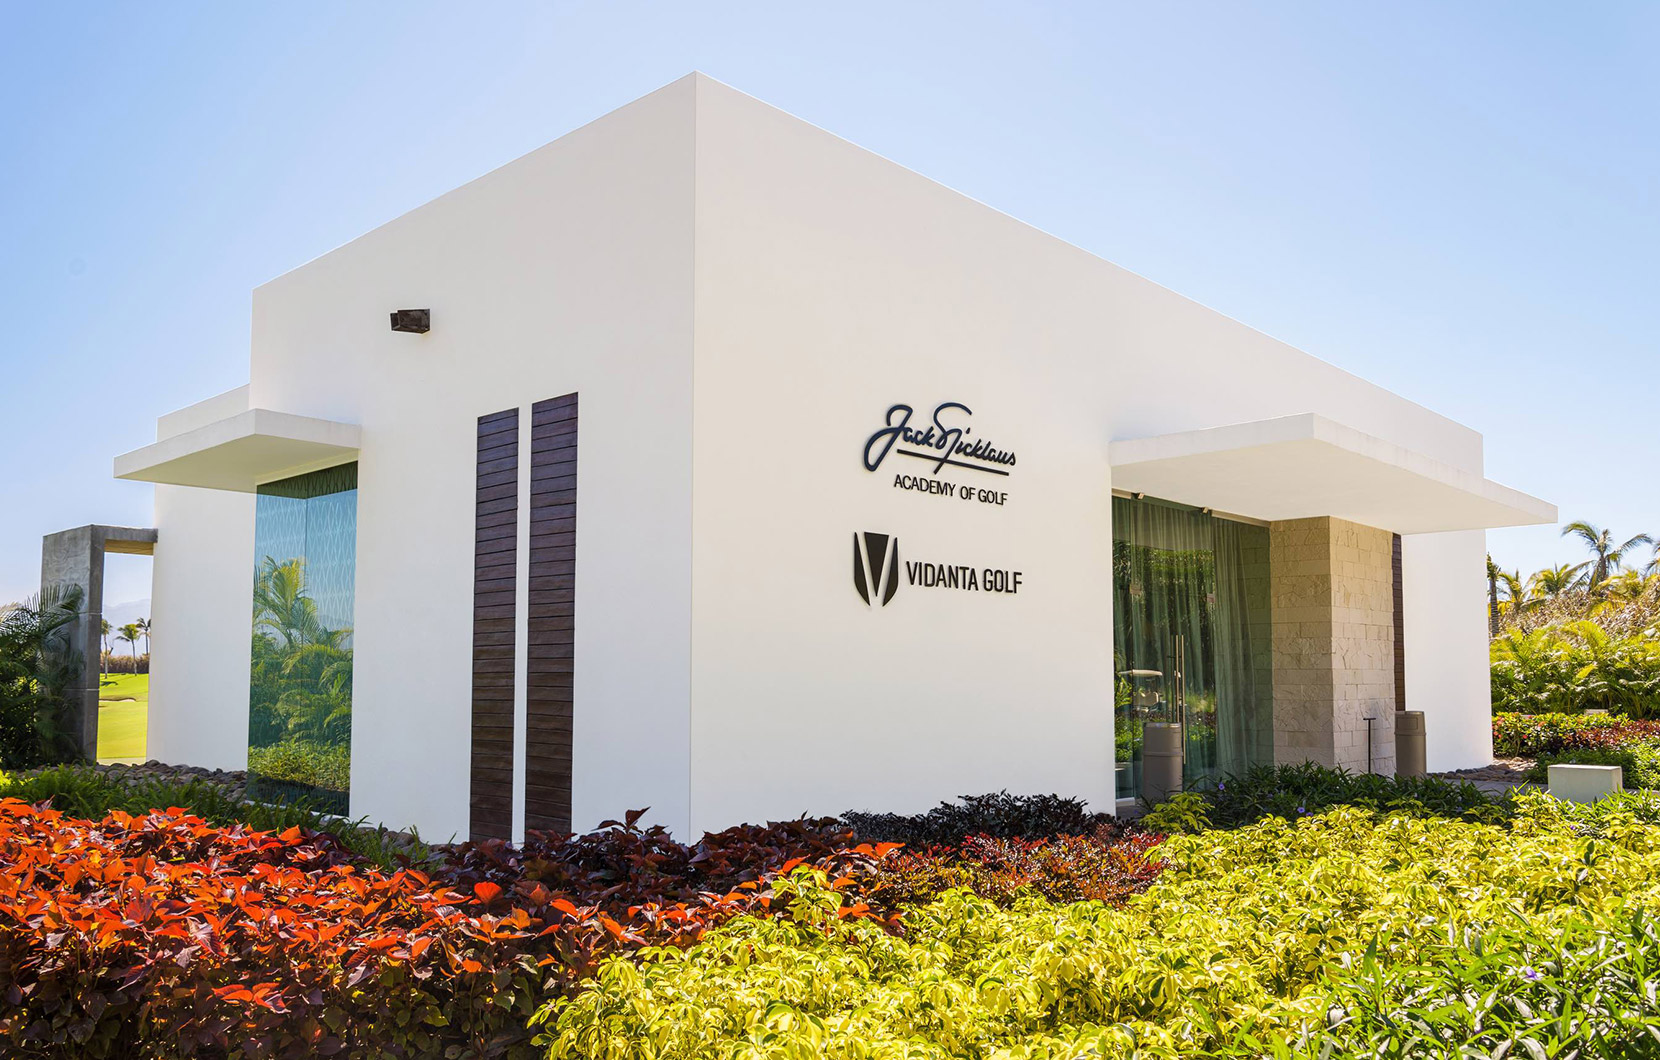 Vidanta Golf Academies have what you need to keep your new-improved swing in top shape.